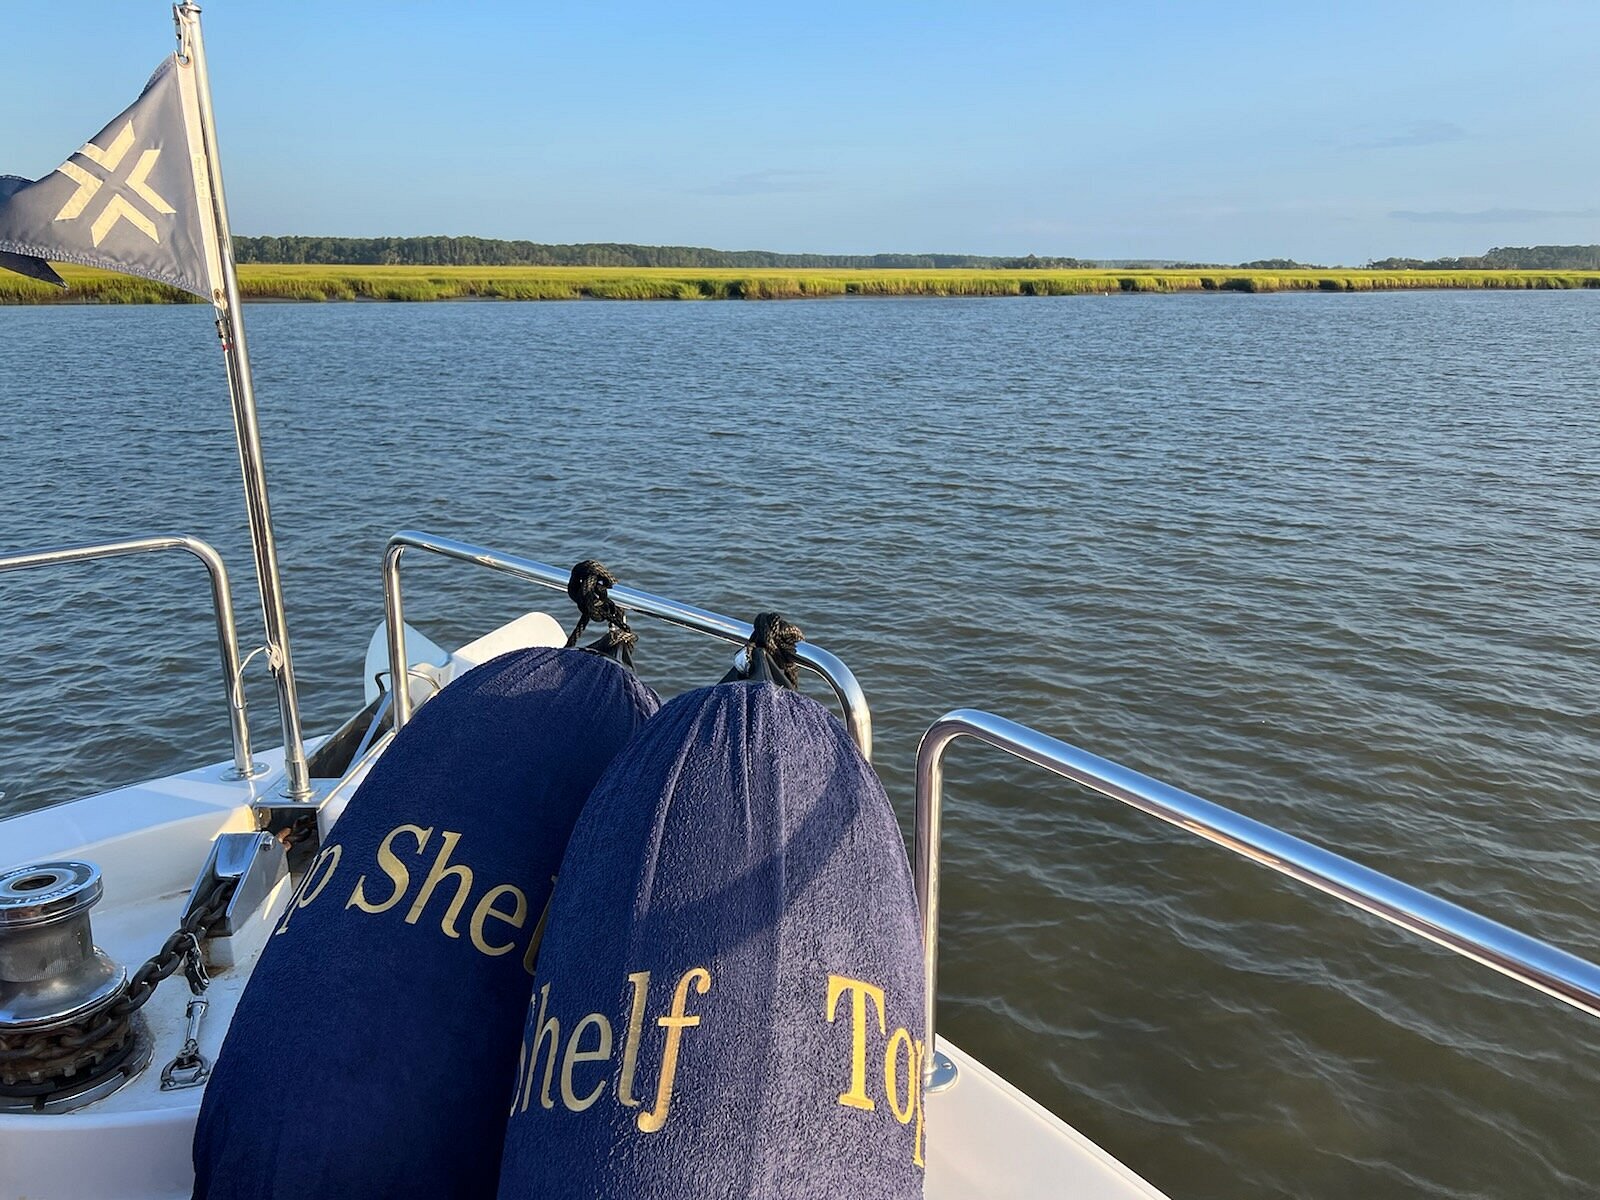 Hilton Head Yacht Charter All You Need to Know BEFORE You Go